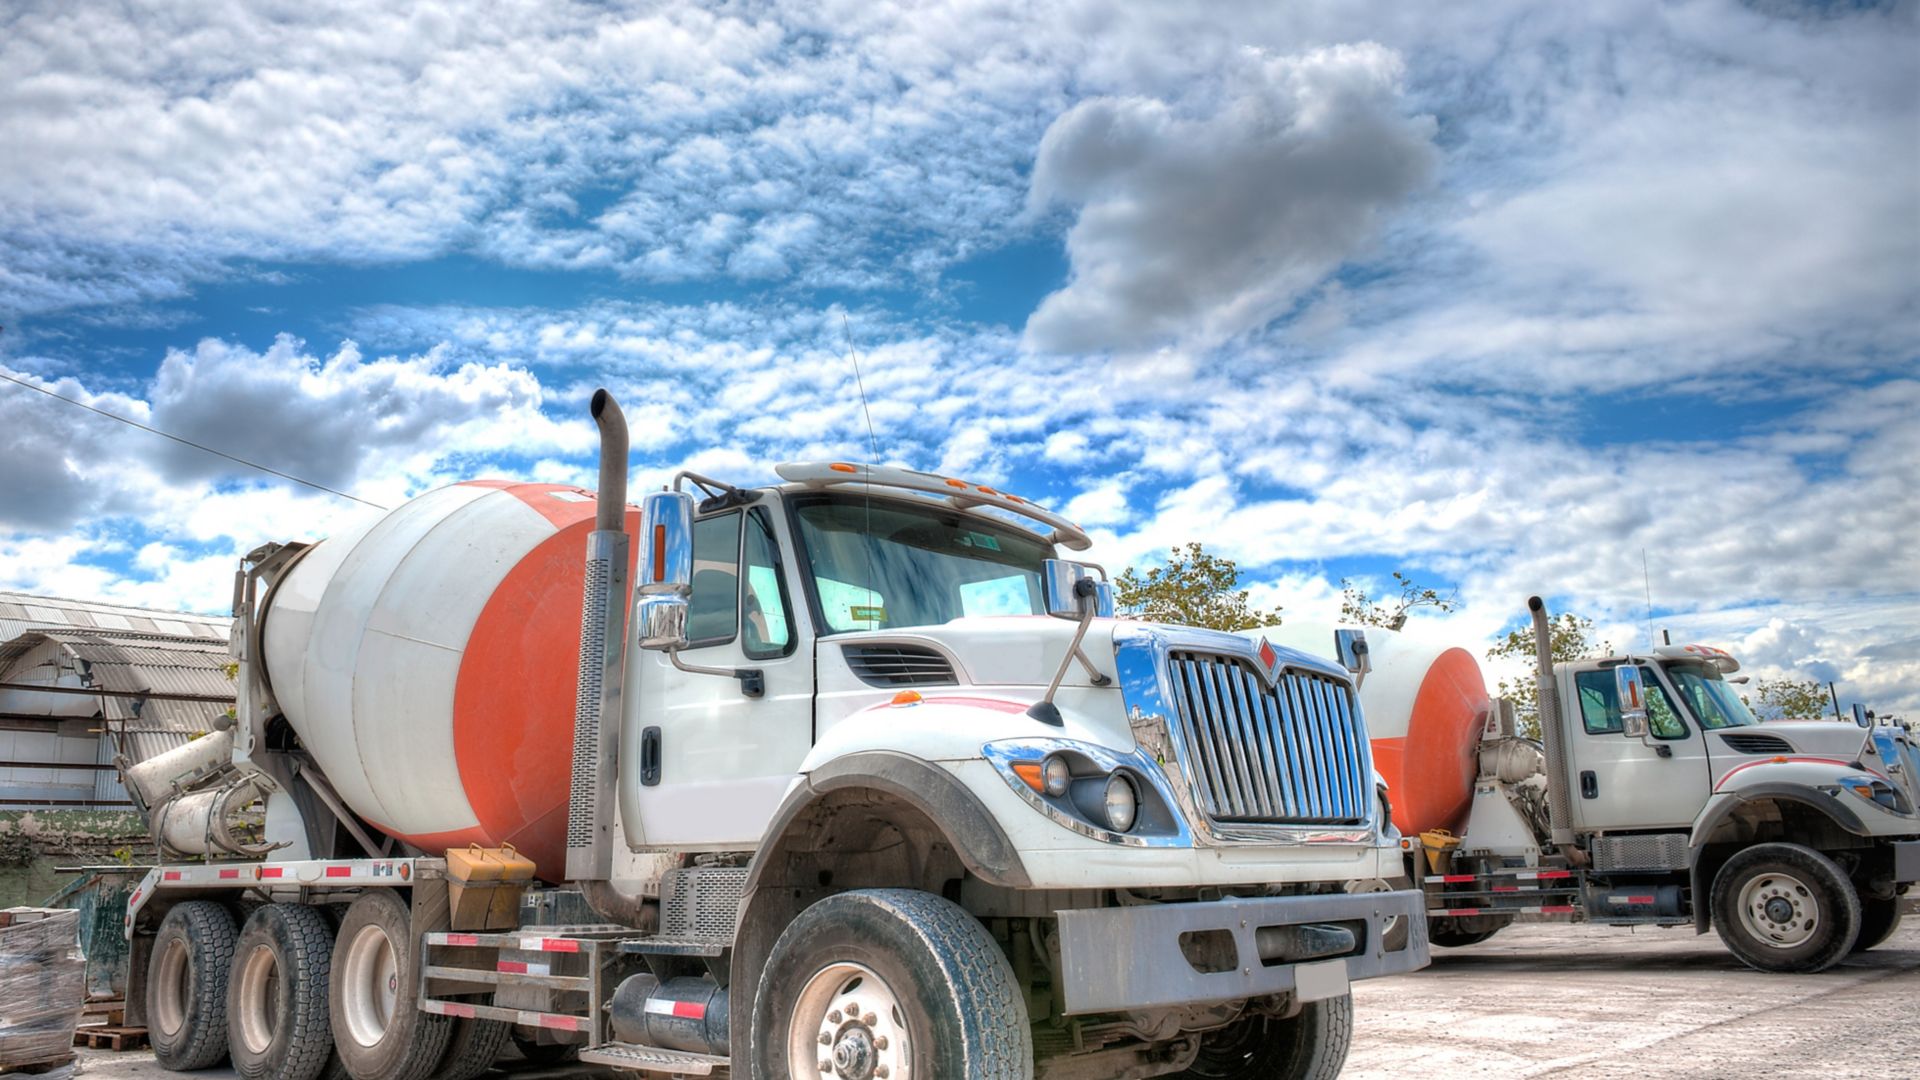 Great HDR shot of a mixer truck parked in a concrete company